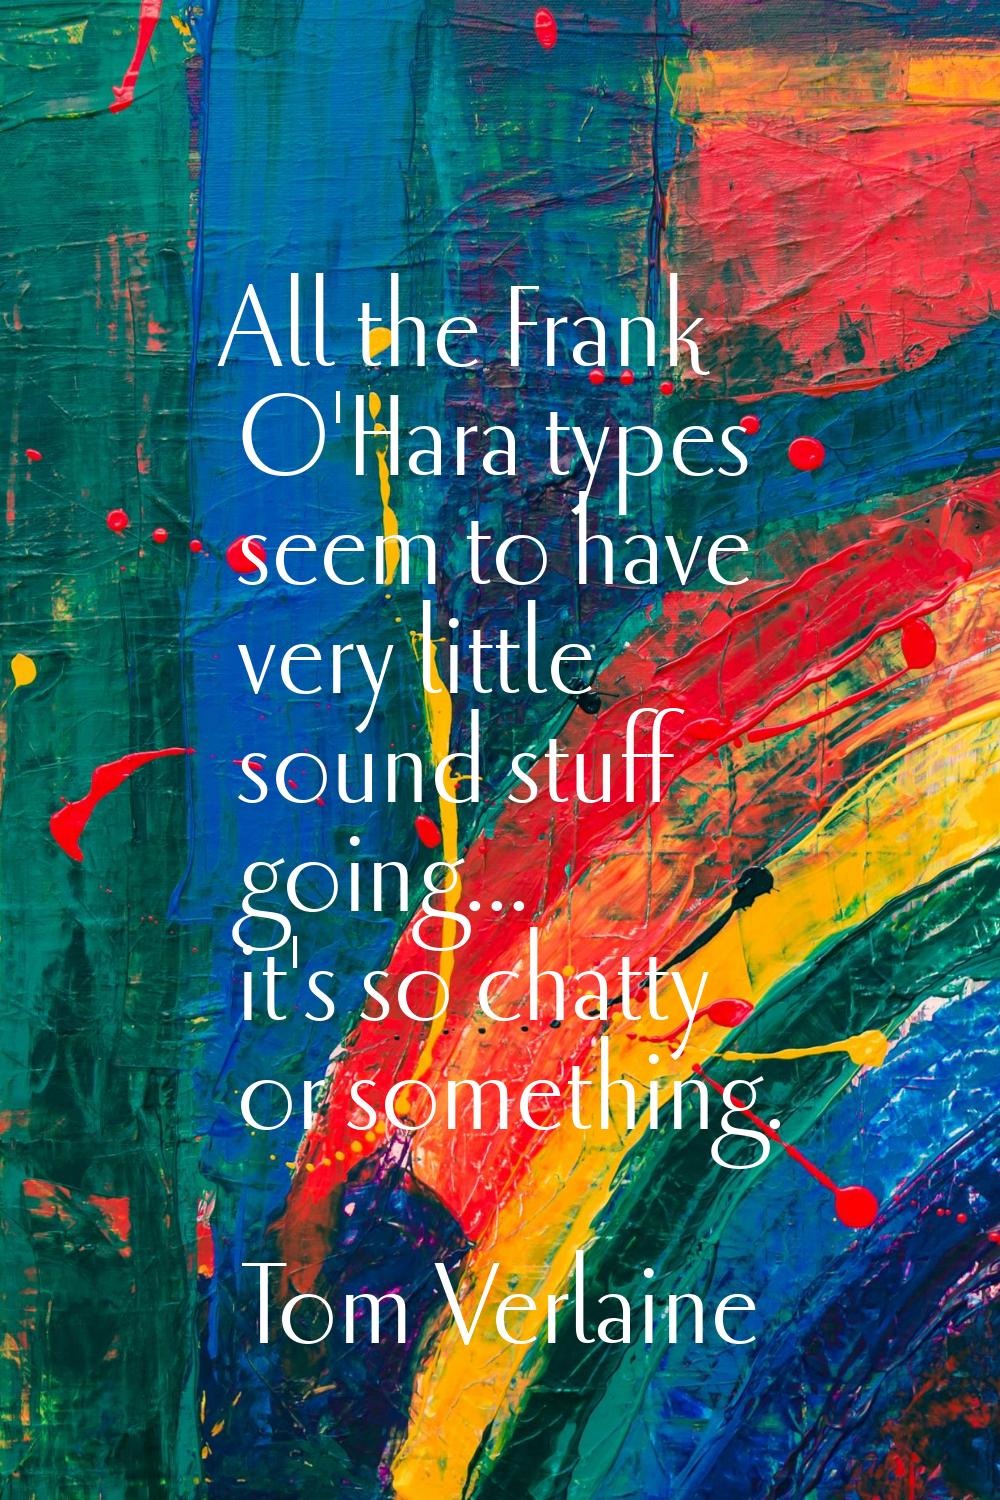 All the Frank O'Hara types seem to have very little sound stuff going... it's so chatty or somethin